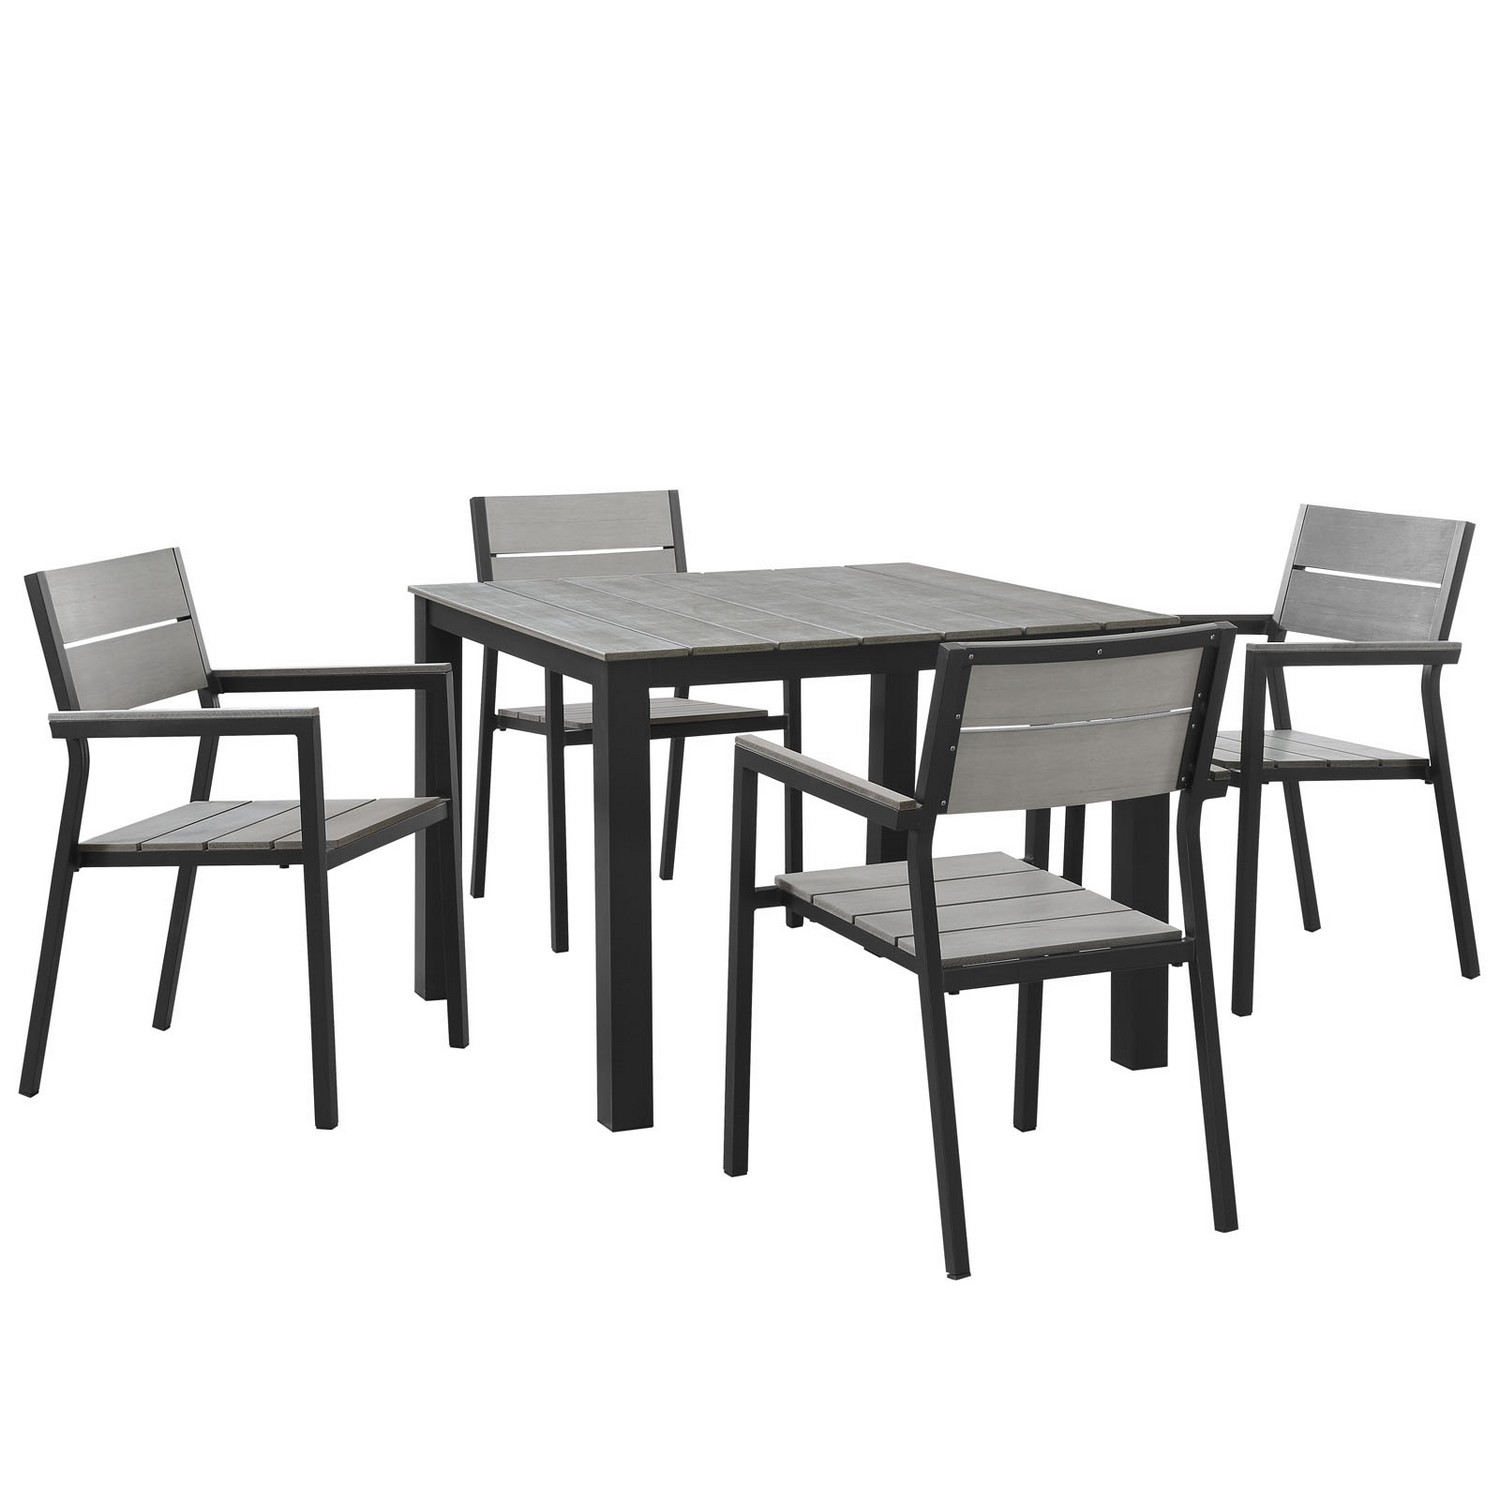 Modway Maine 5 Piece Outdoor Patio Dining Set - Brown/Gray